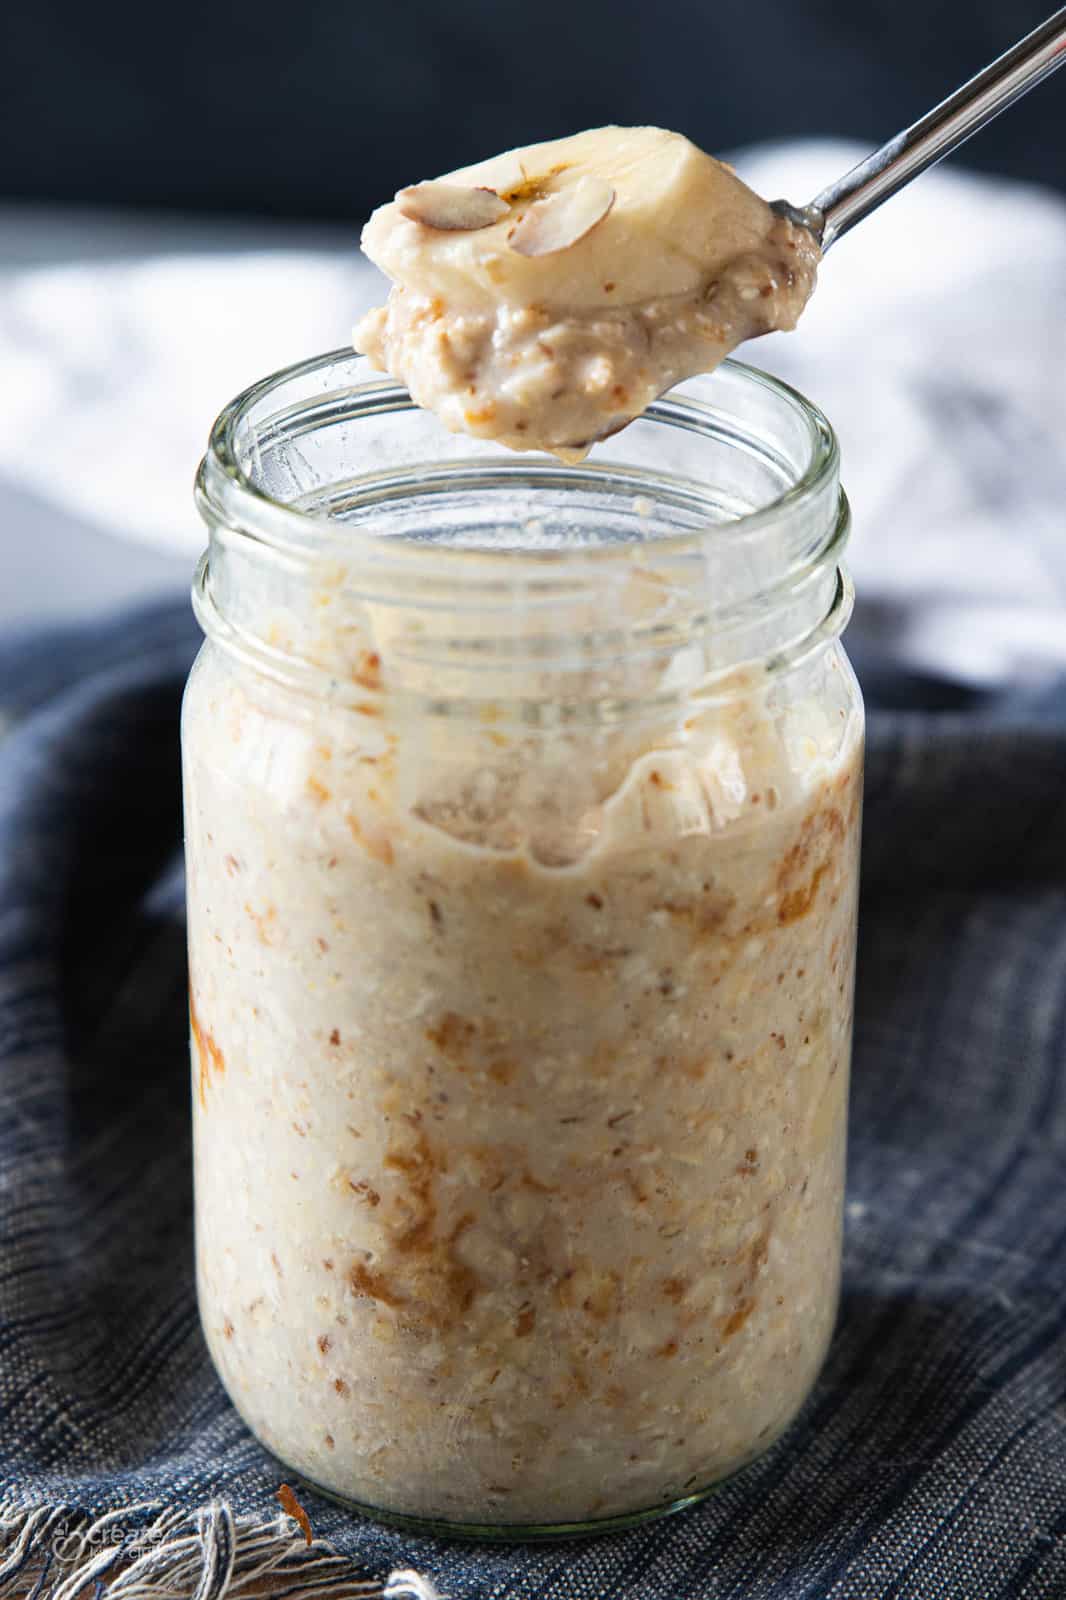 spoon scooping a bite of oatmeal from mashed jar